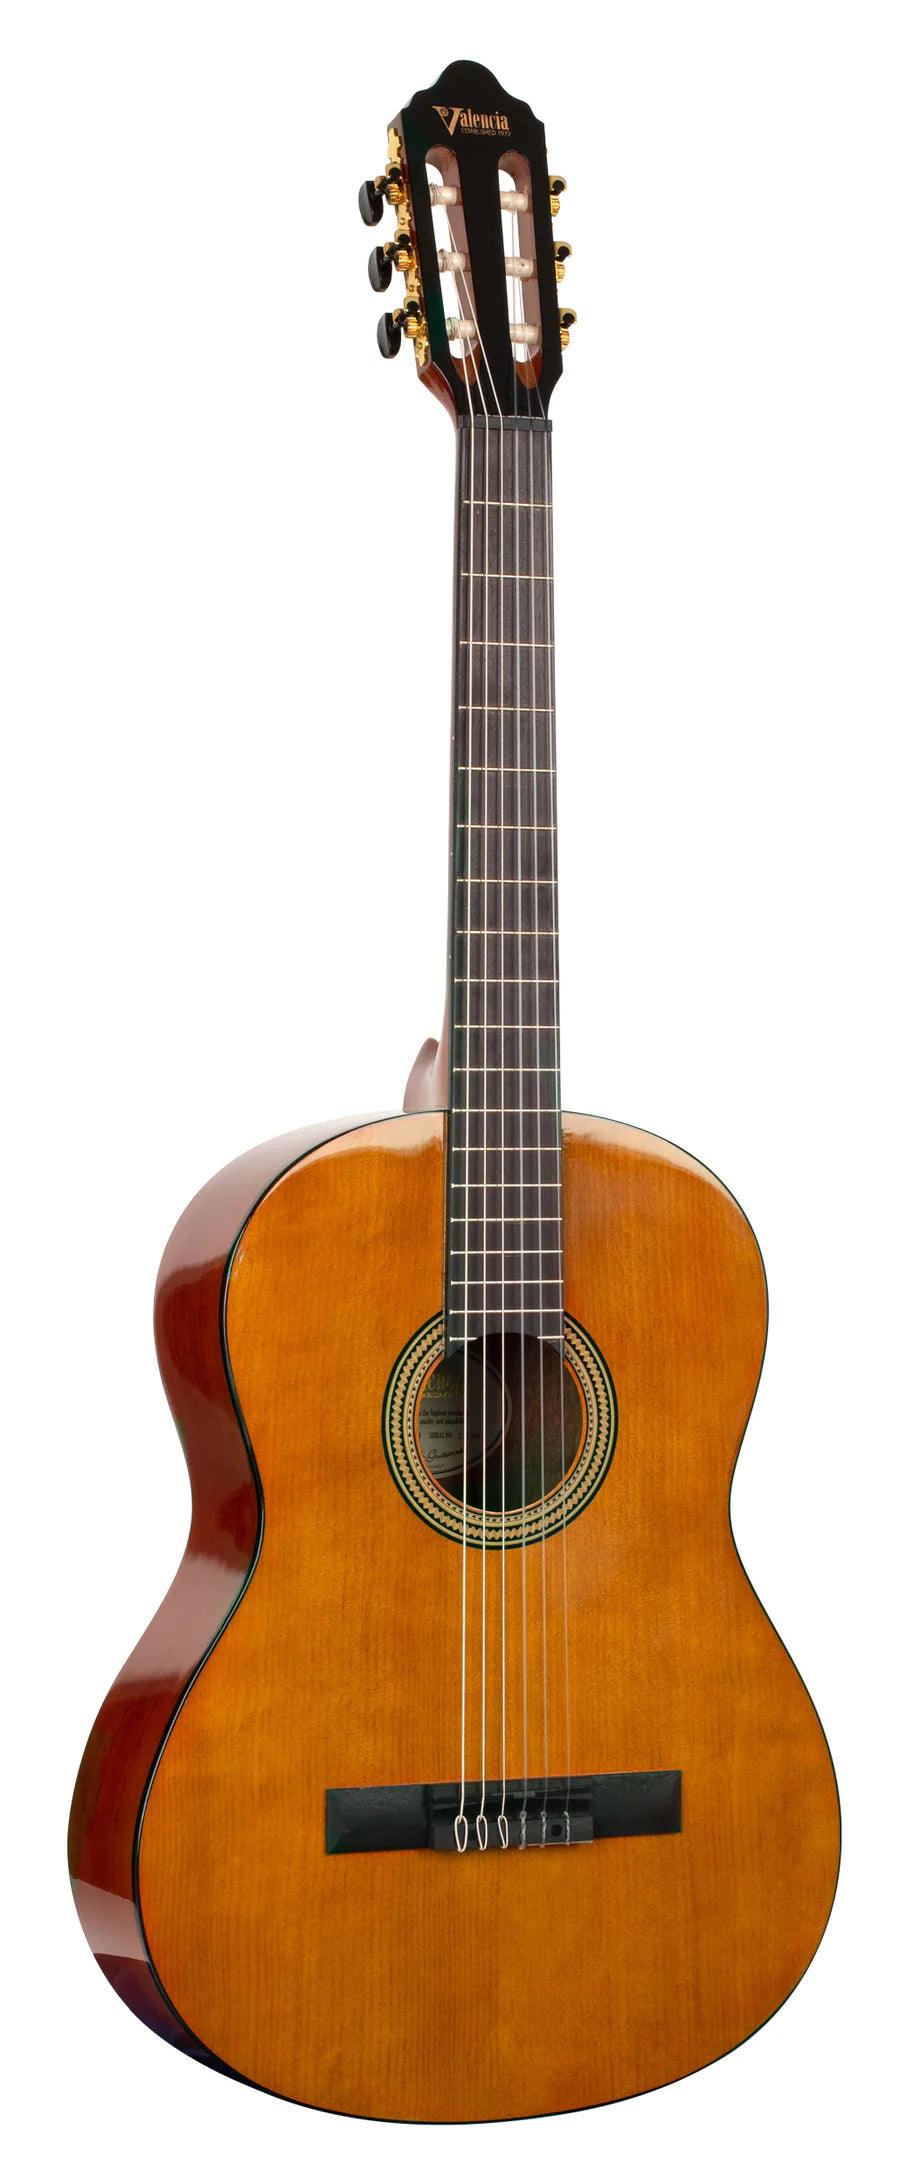 Hybrid Classical Guitar Full Size 260 Series - Guitars - Classical by Valencia at Muso's Stuff